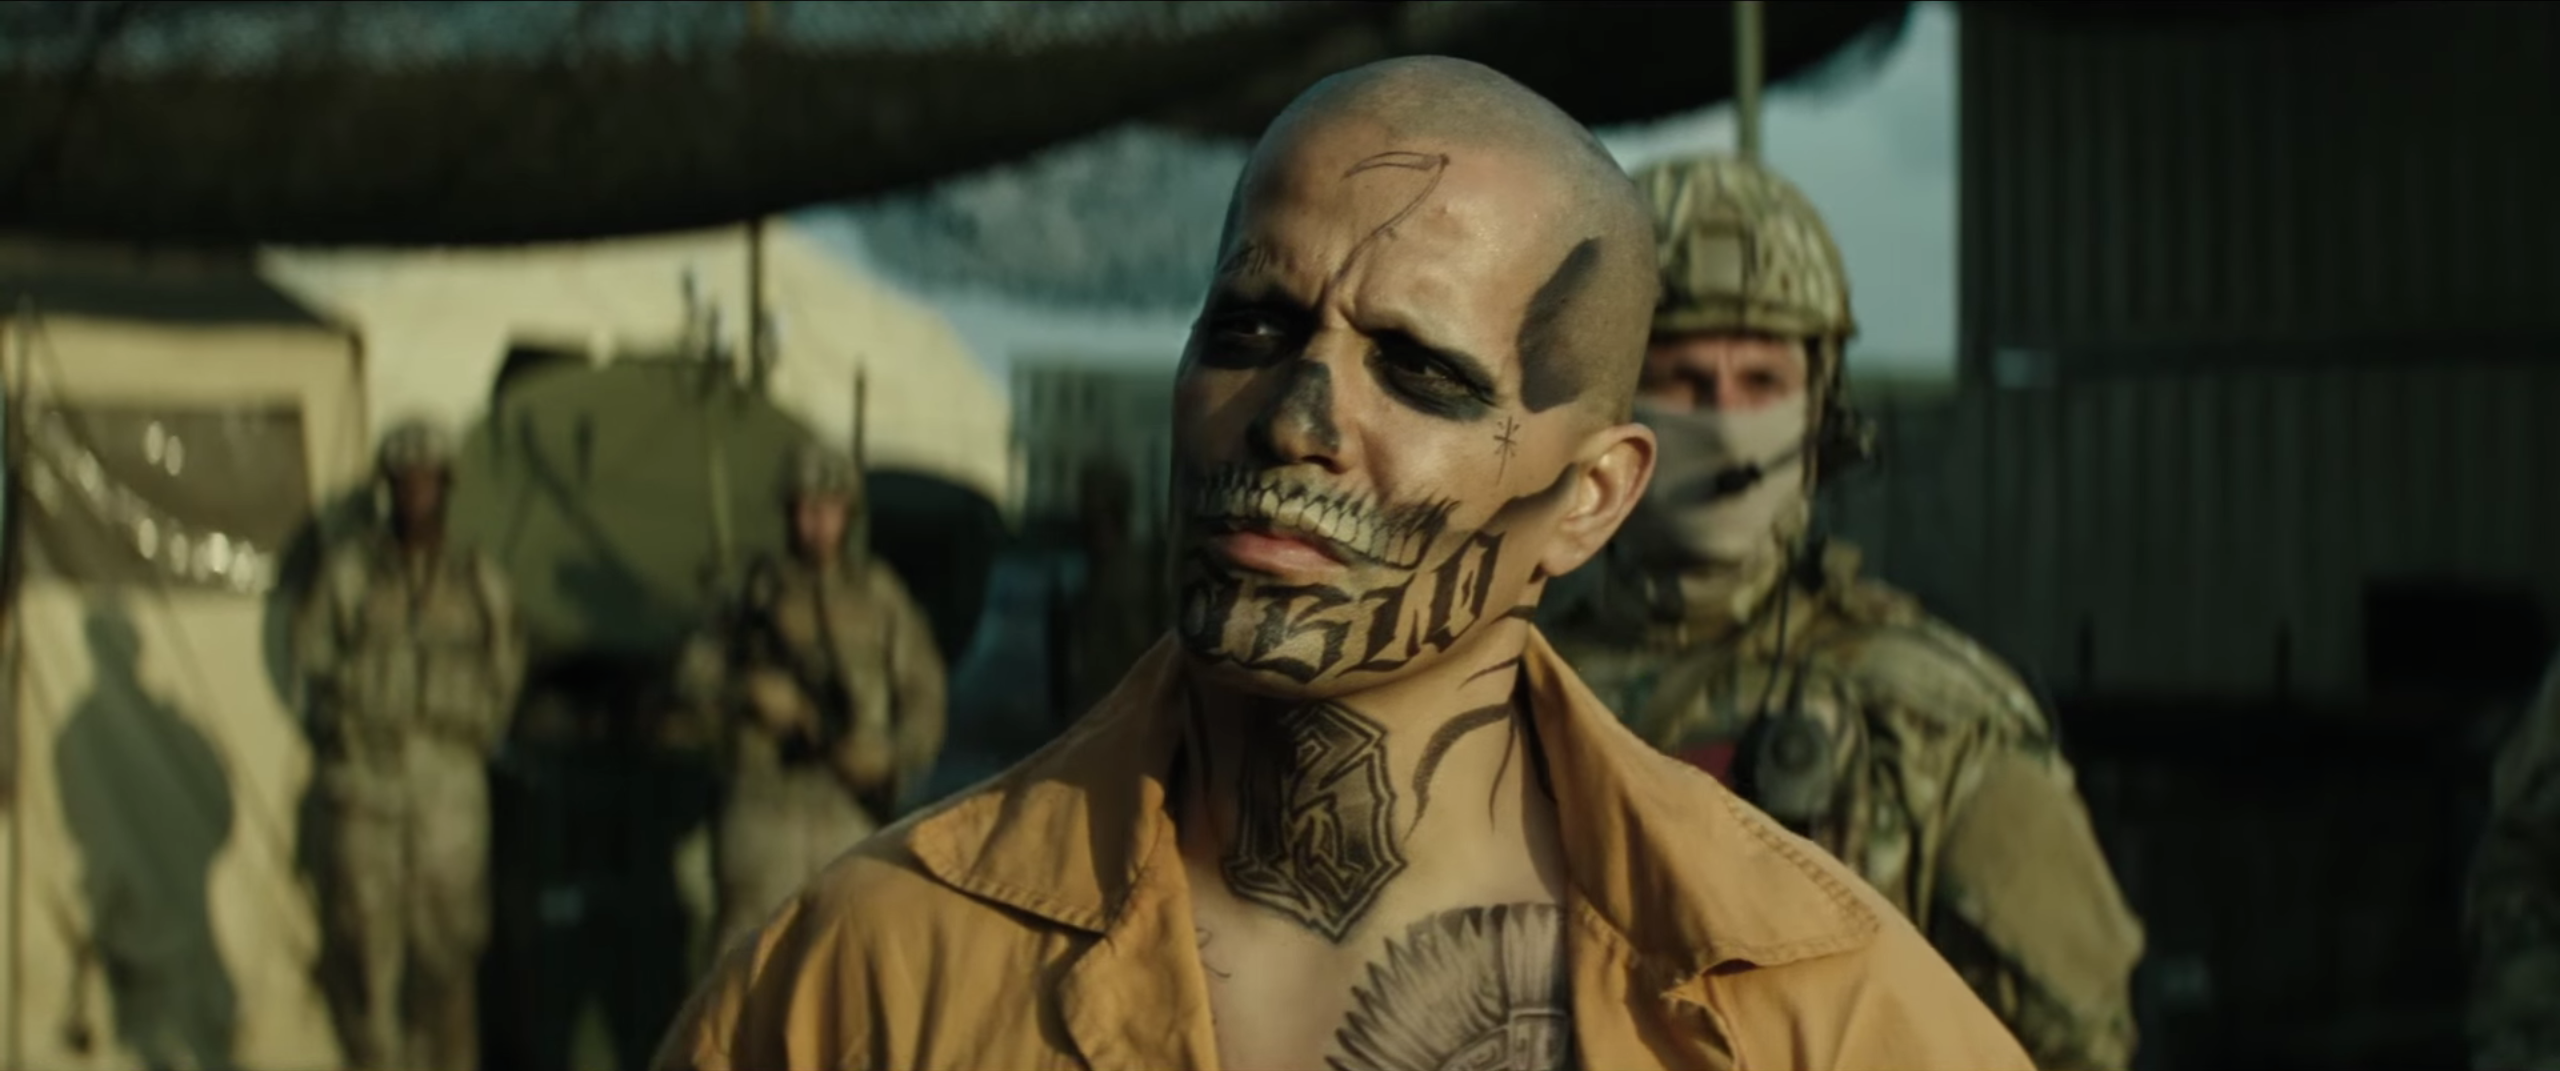 The new trailer for David Ayer's Suicide Squad was definitely insane! 